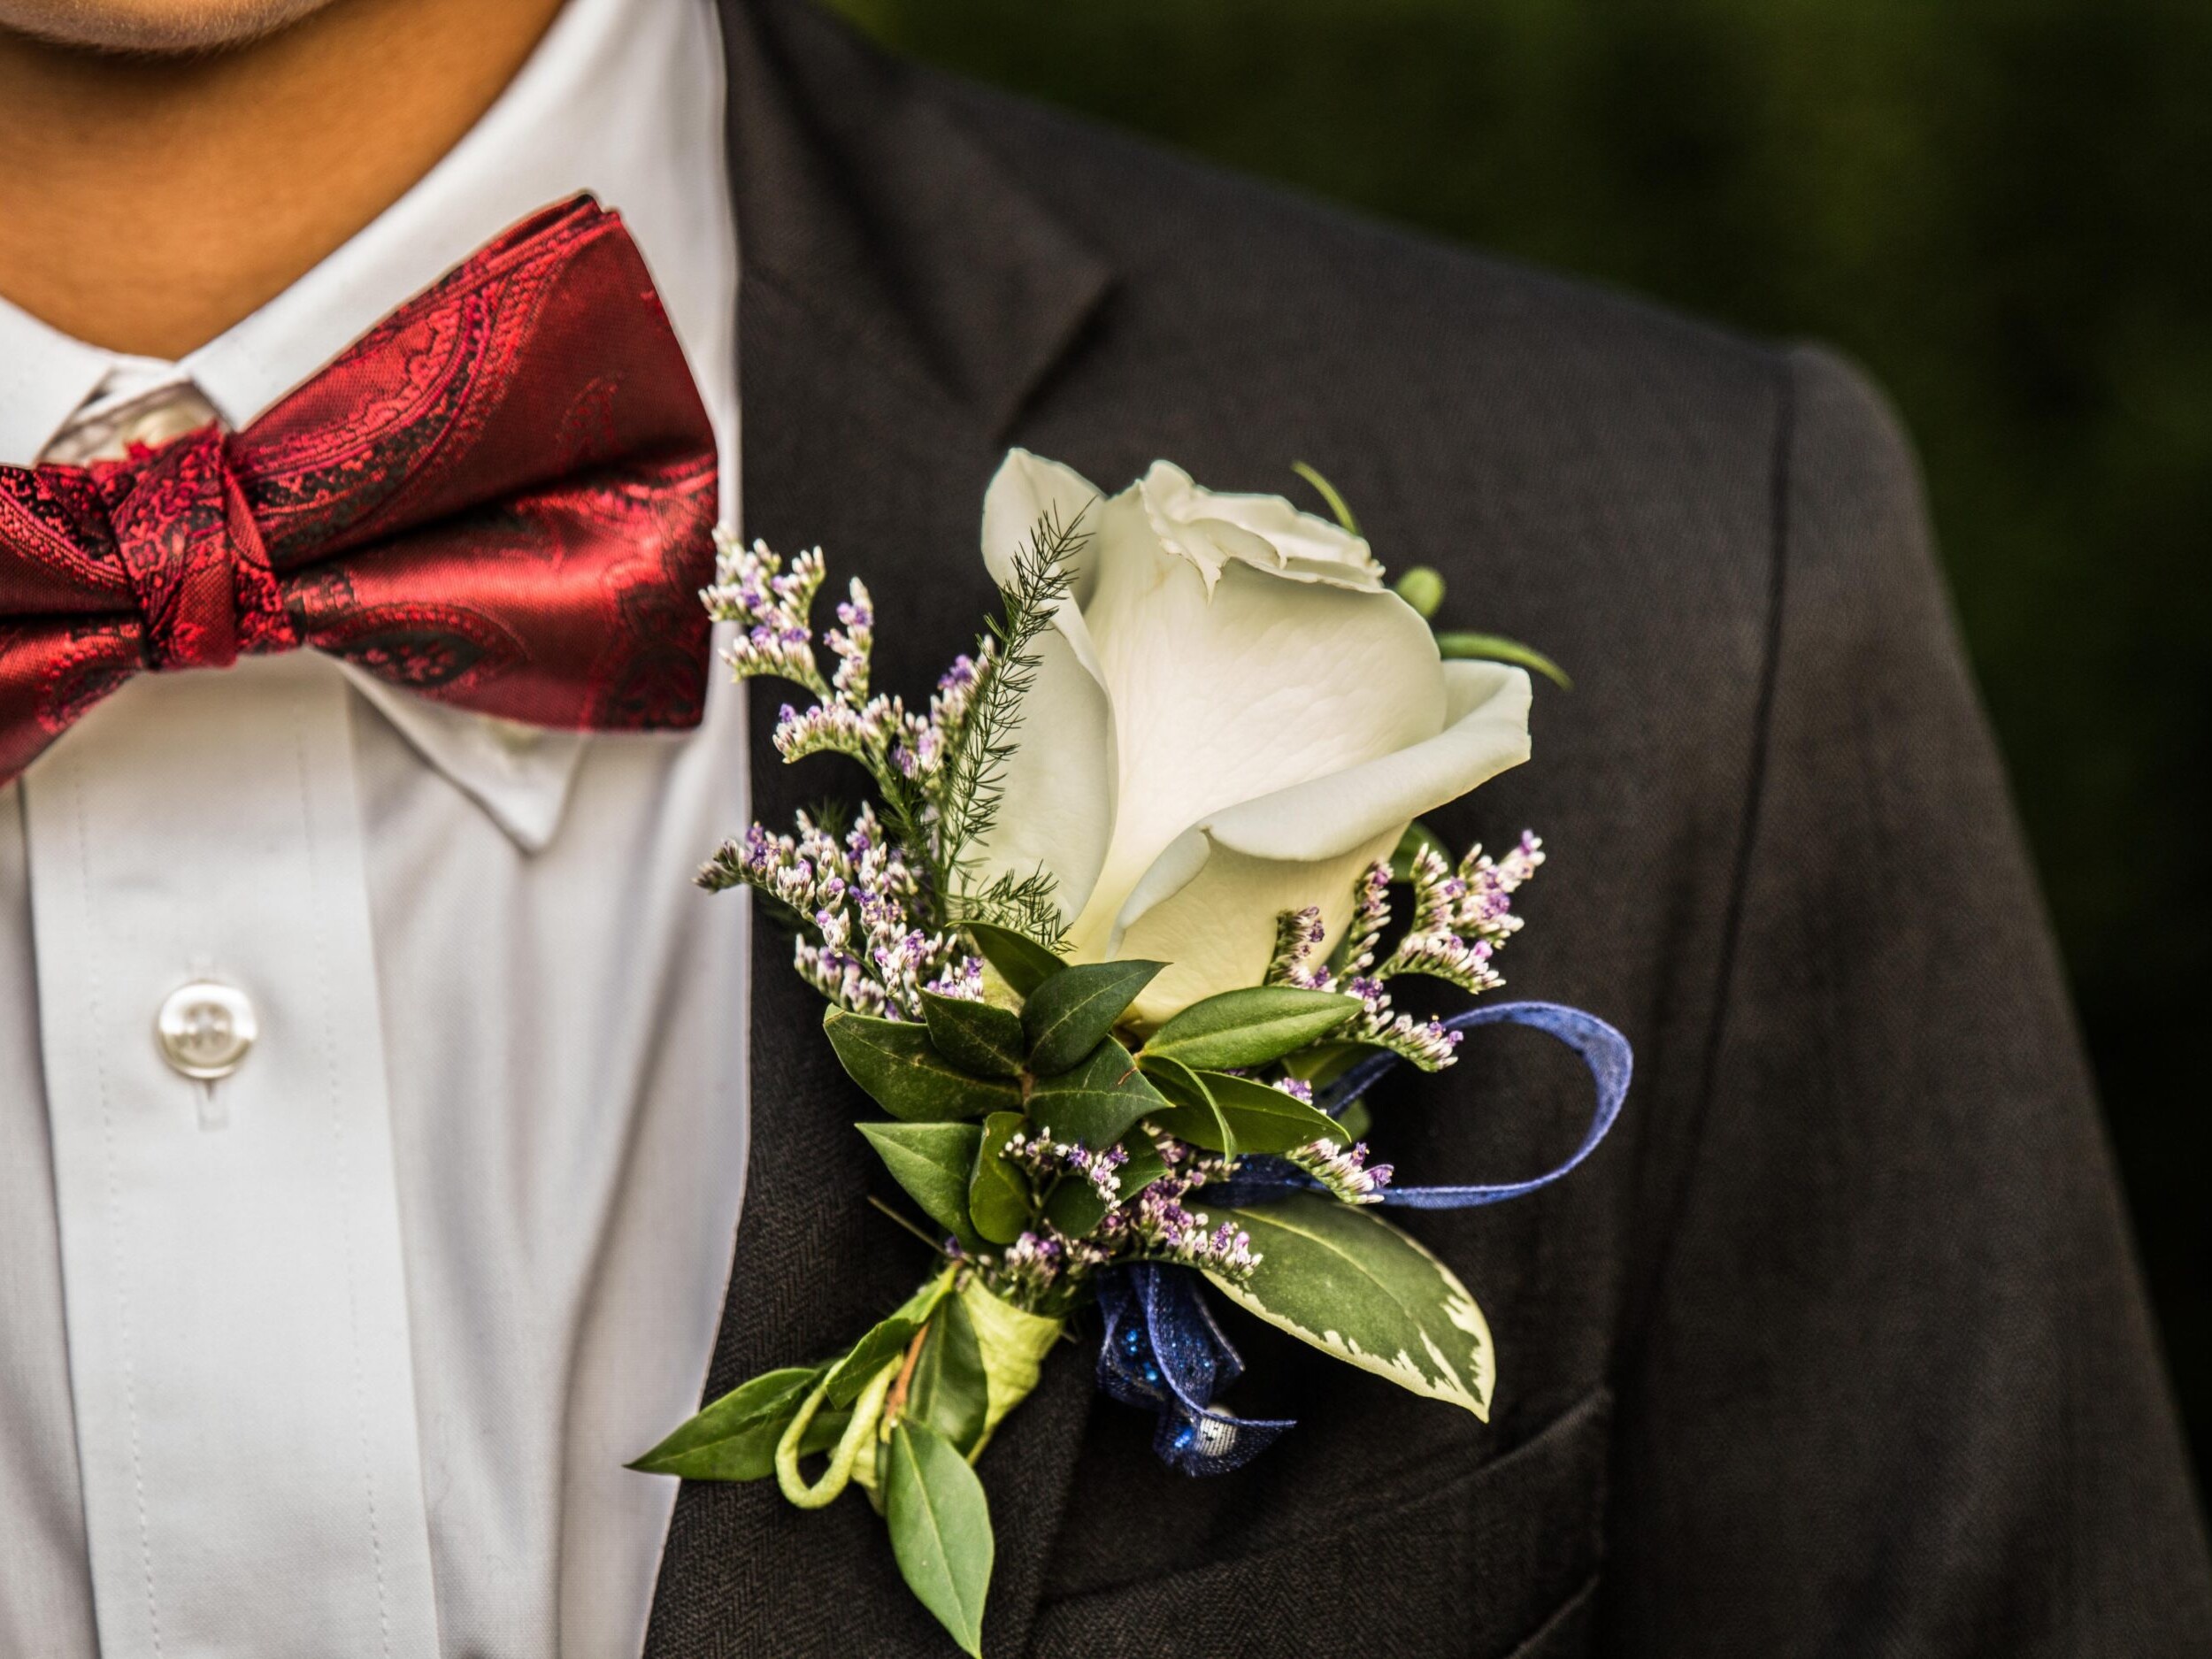 A boutonniere on a black suit next to a red bowtie.